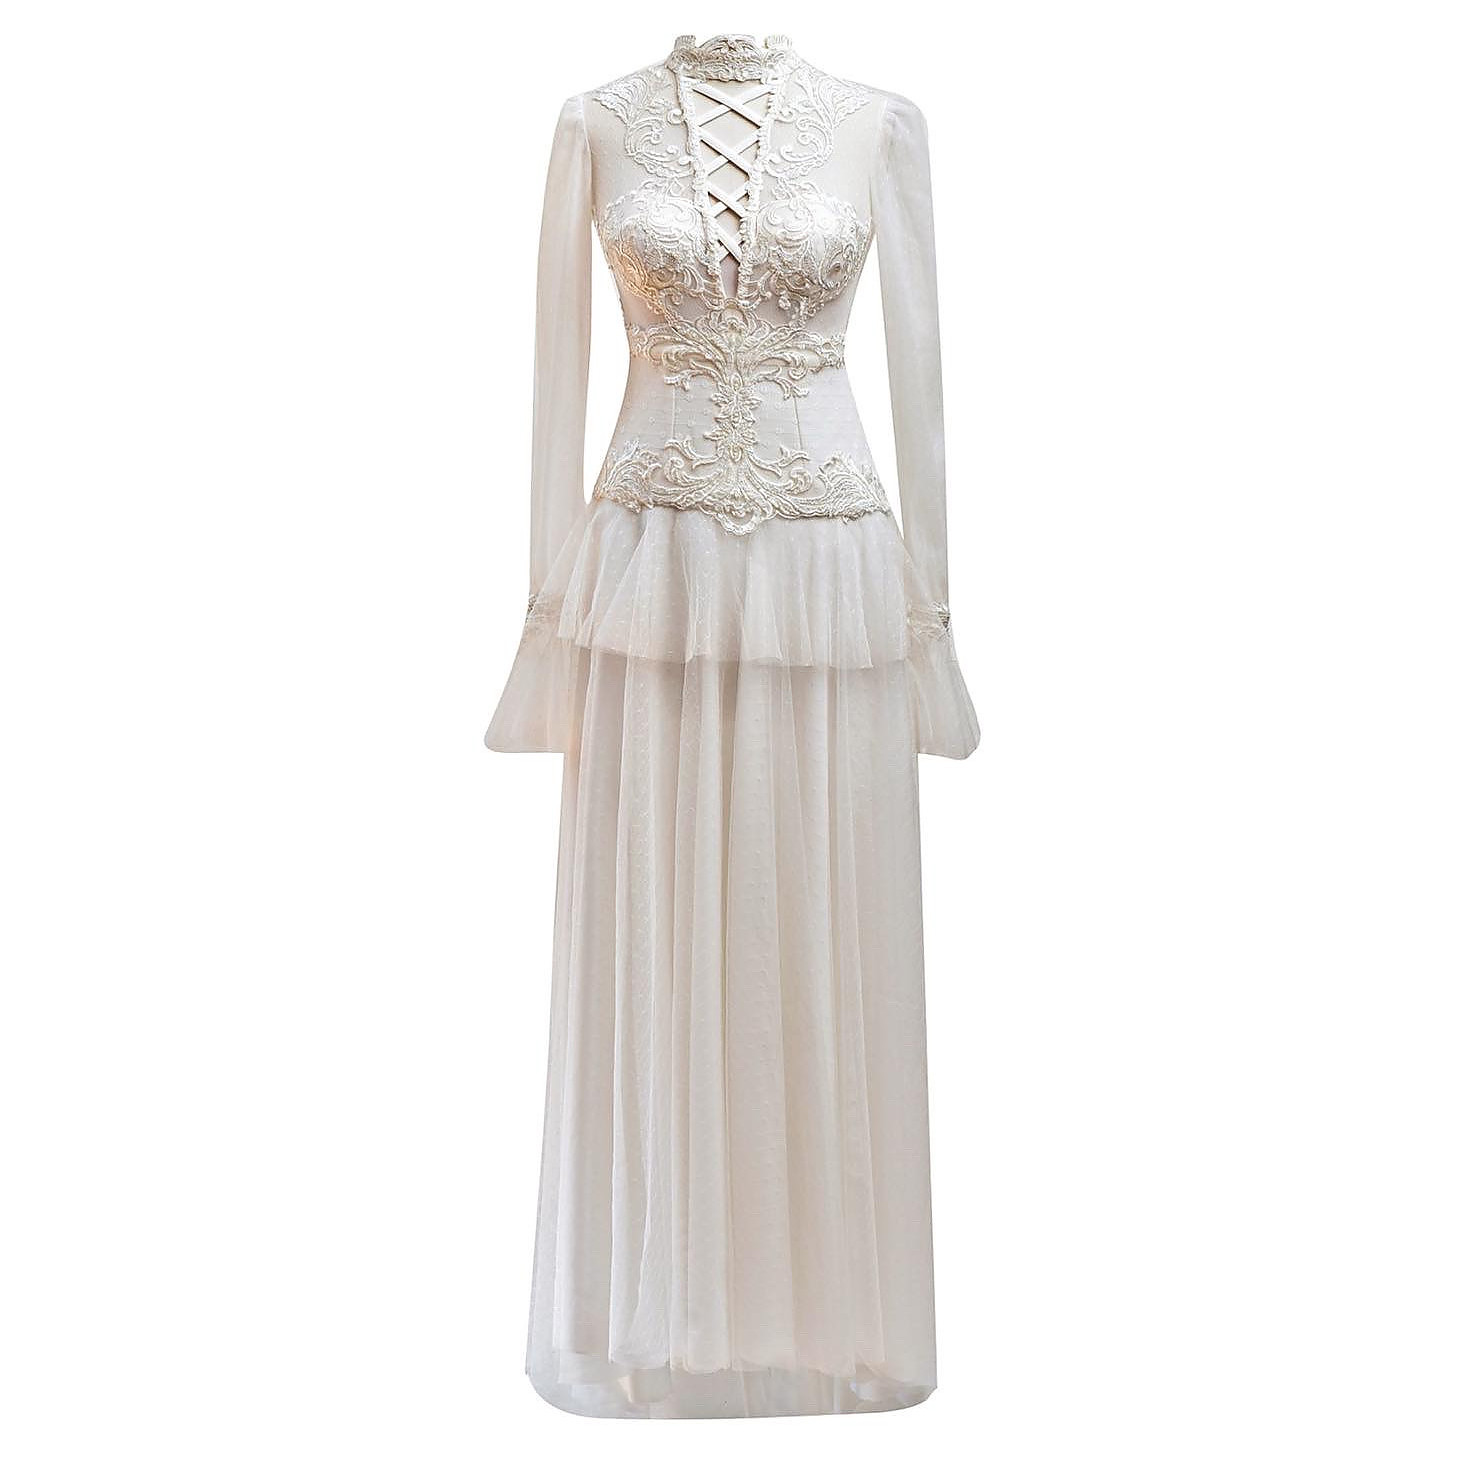 Barrus London Embroidered Tulle Wedding Dress